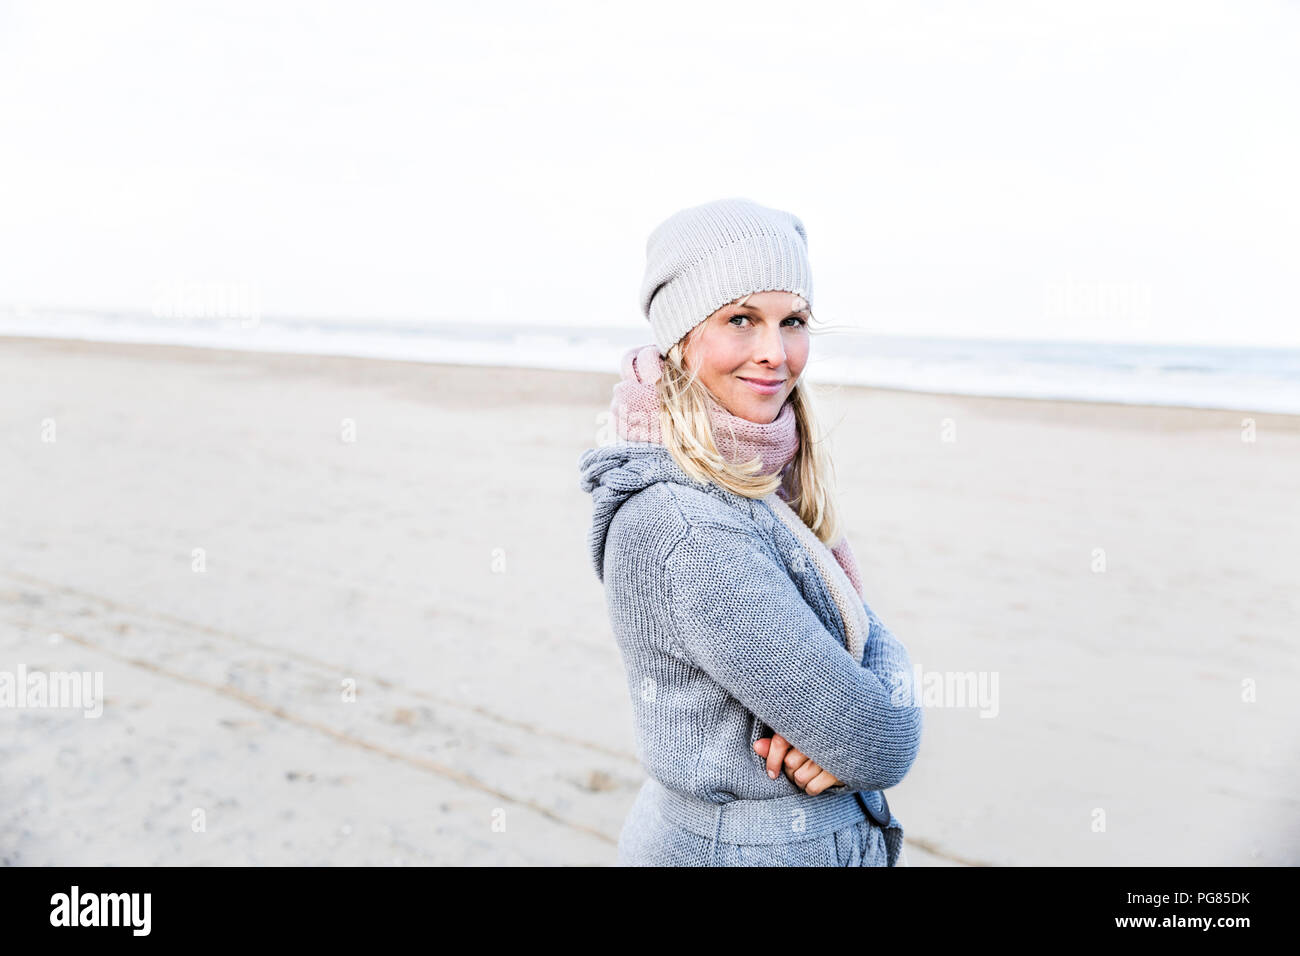 Portrait of smiling woman on the beach Banque D'Images